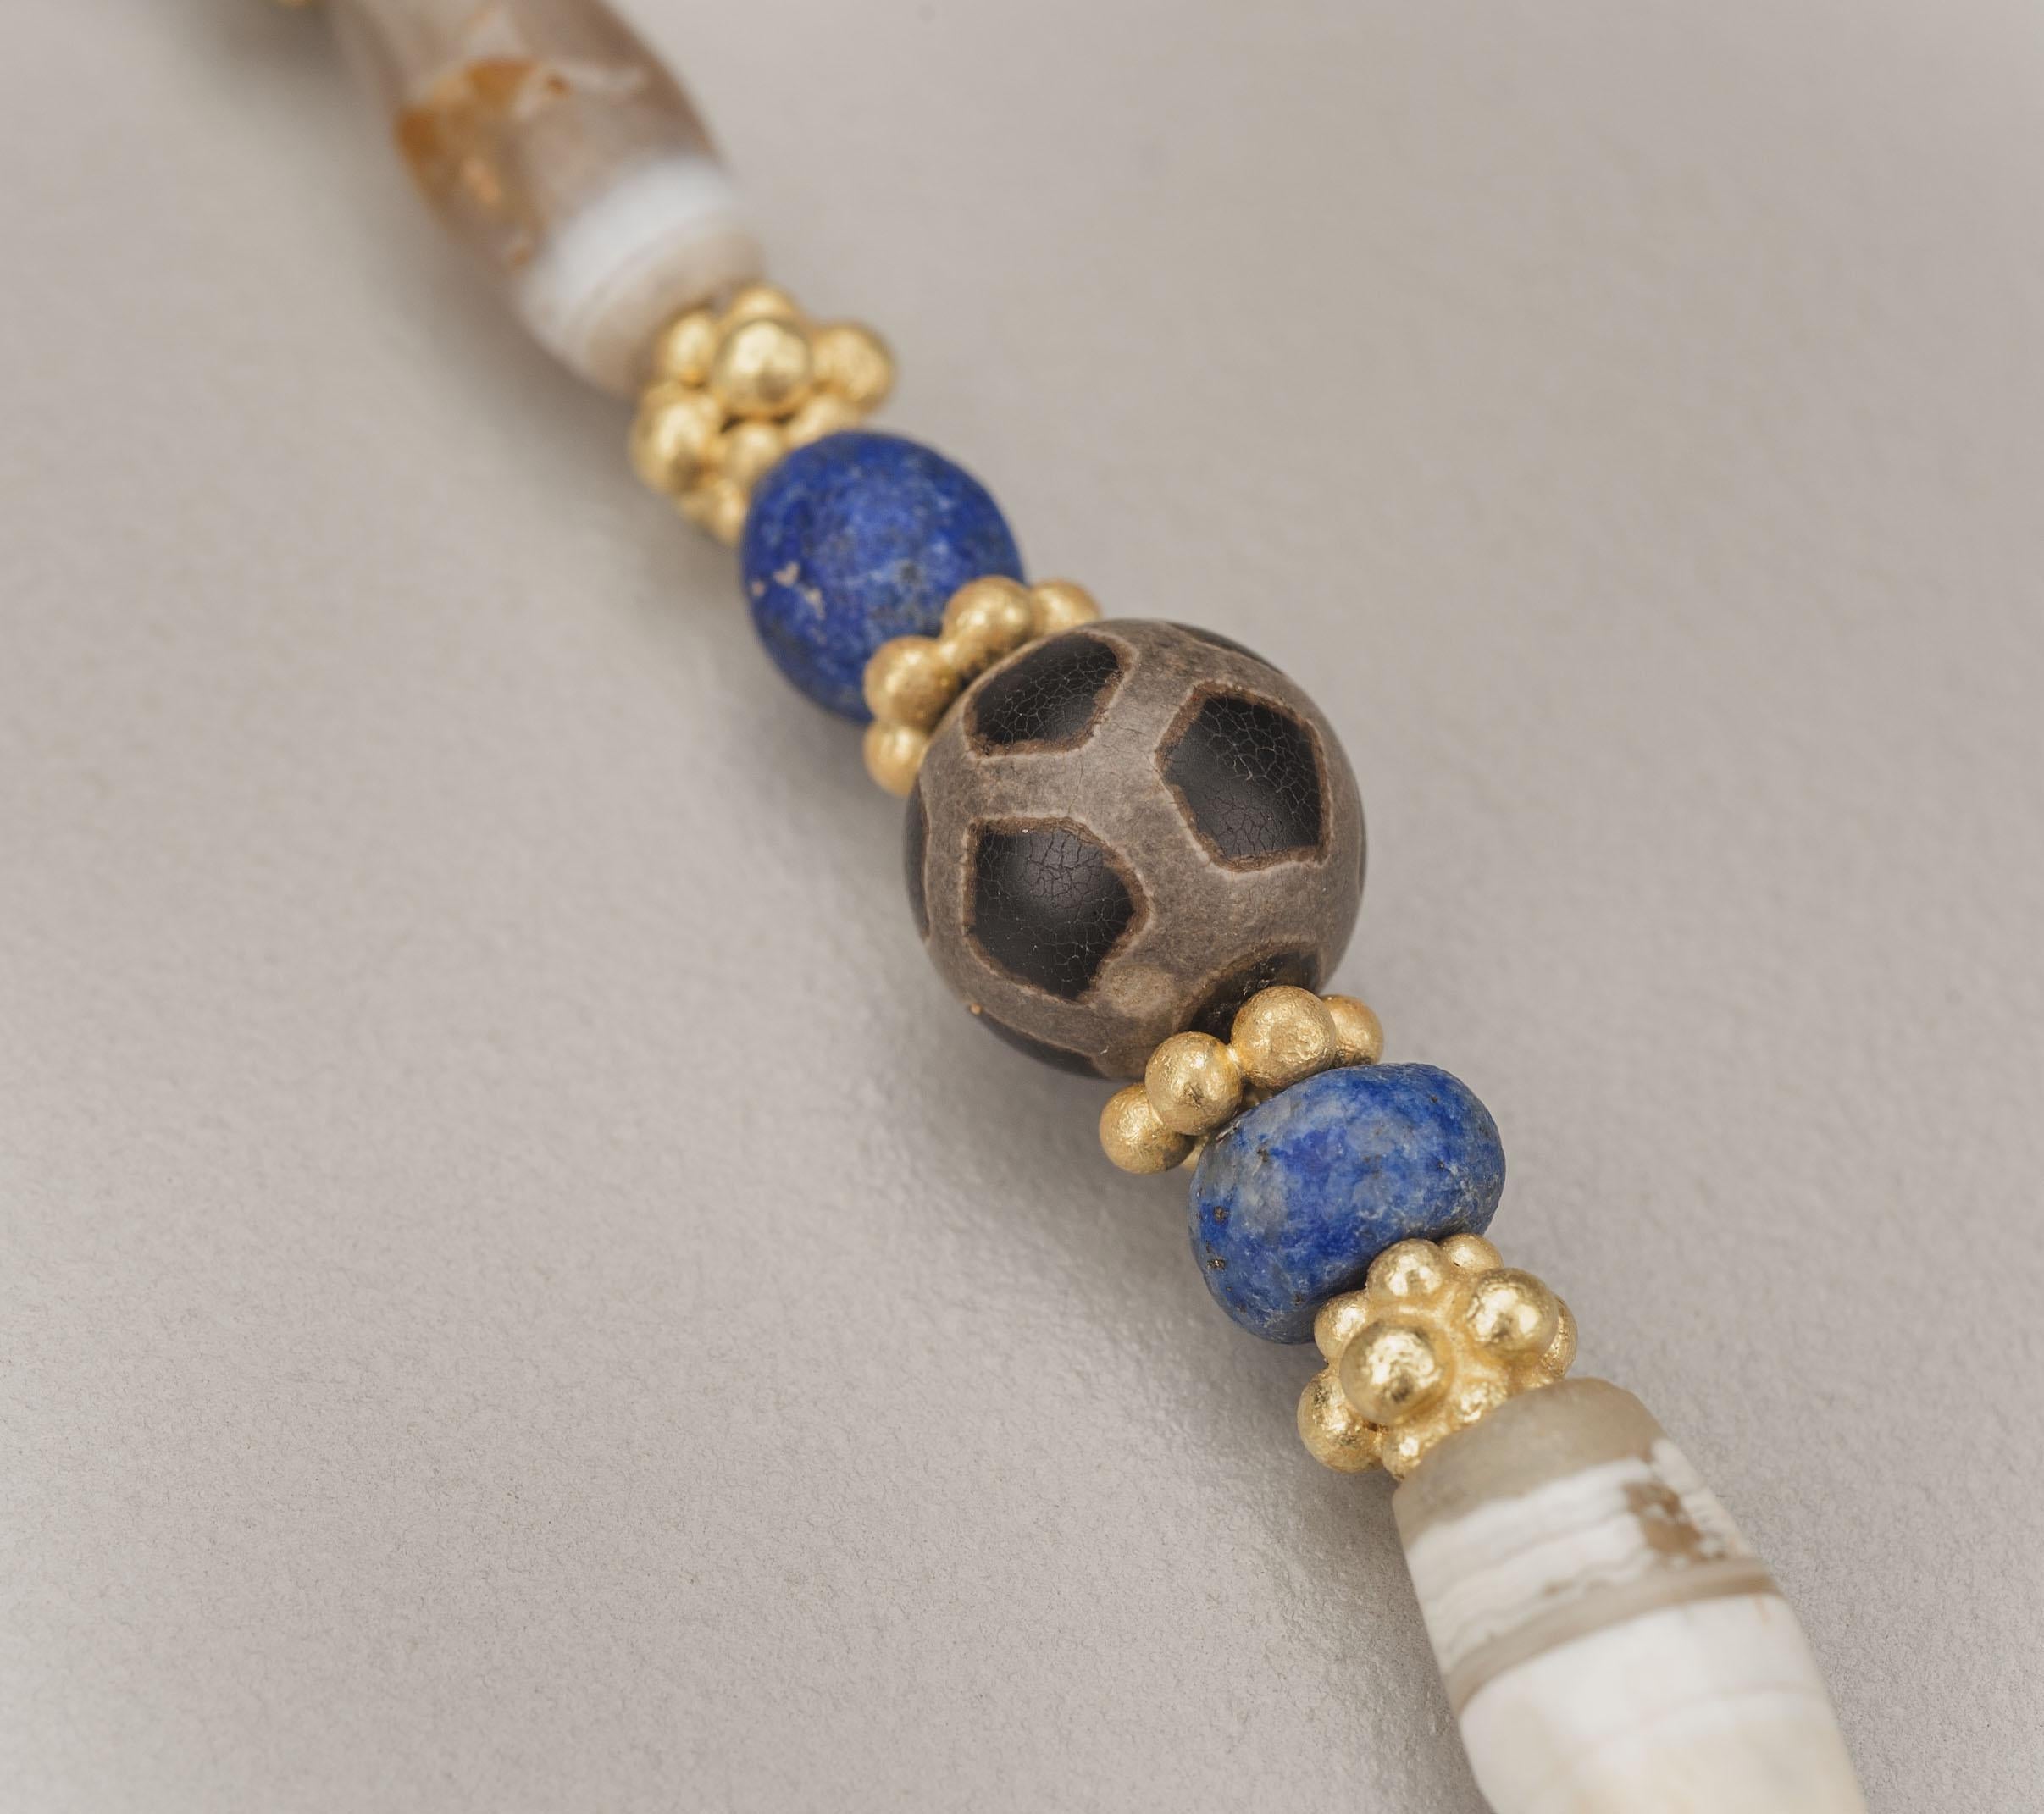 Artist Ancient Agate Beads with Spherical 'Etched' Agates, Lapis Lazuli, and 20k Gold For Sale